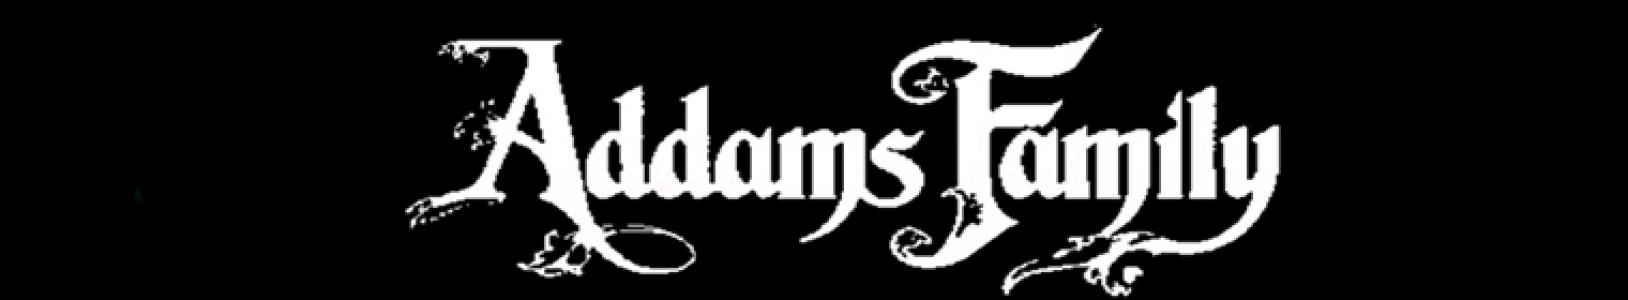 The Addams Family banner